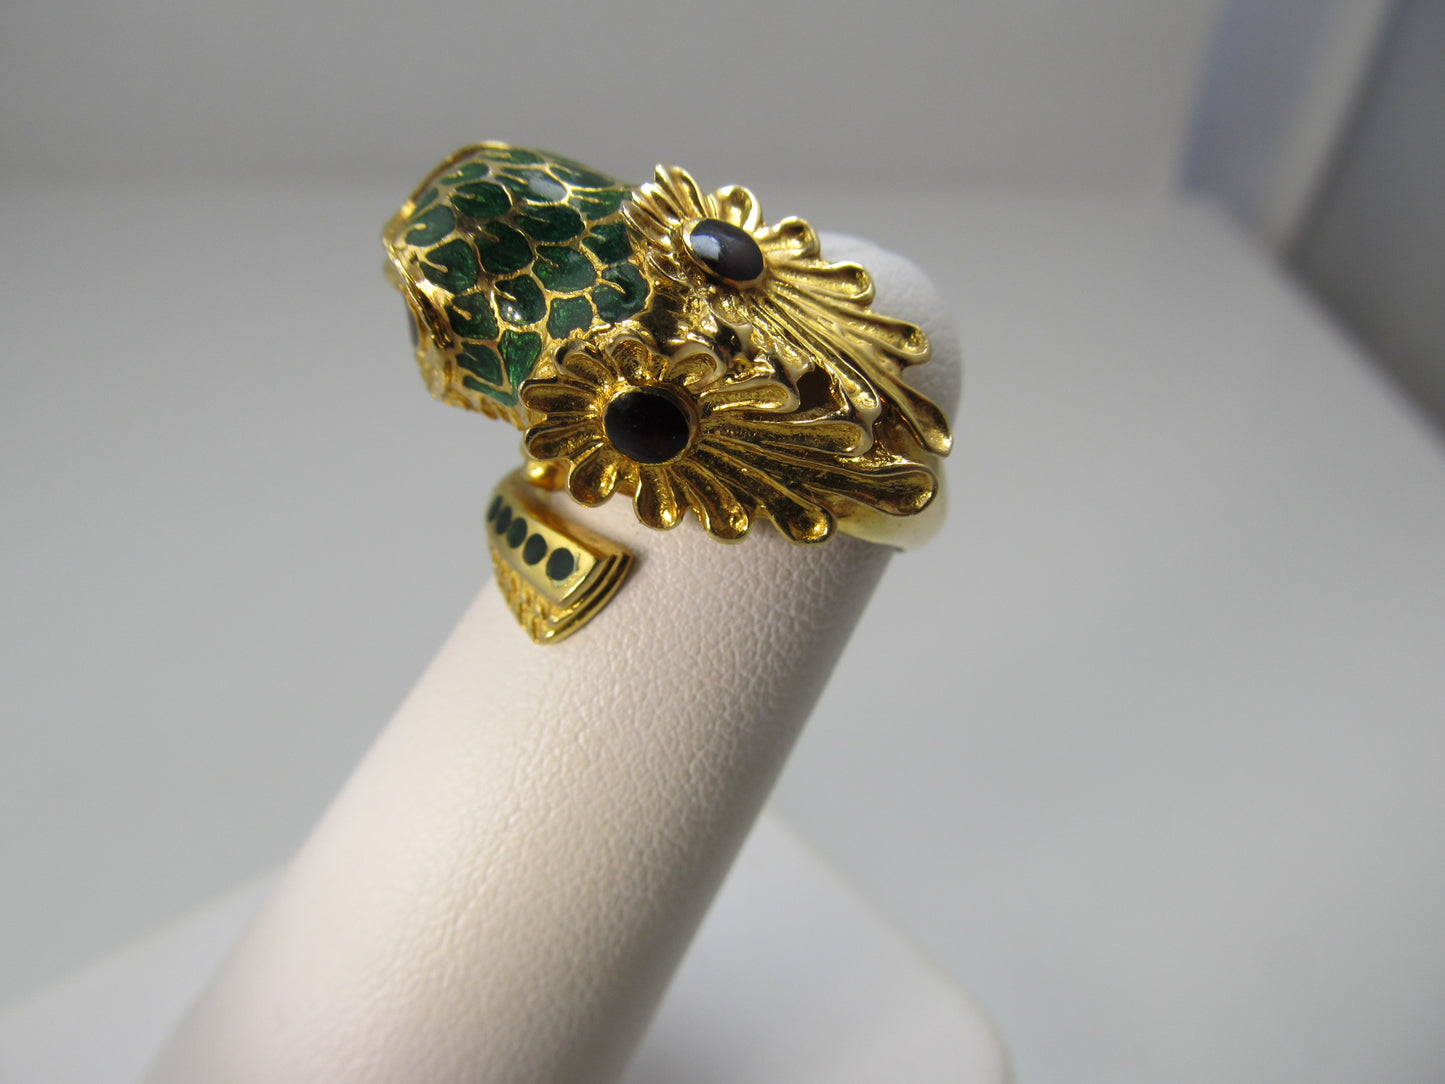 Love!  Vintage owl ring, 18k yellow gold with enamel